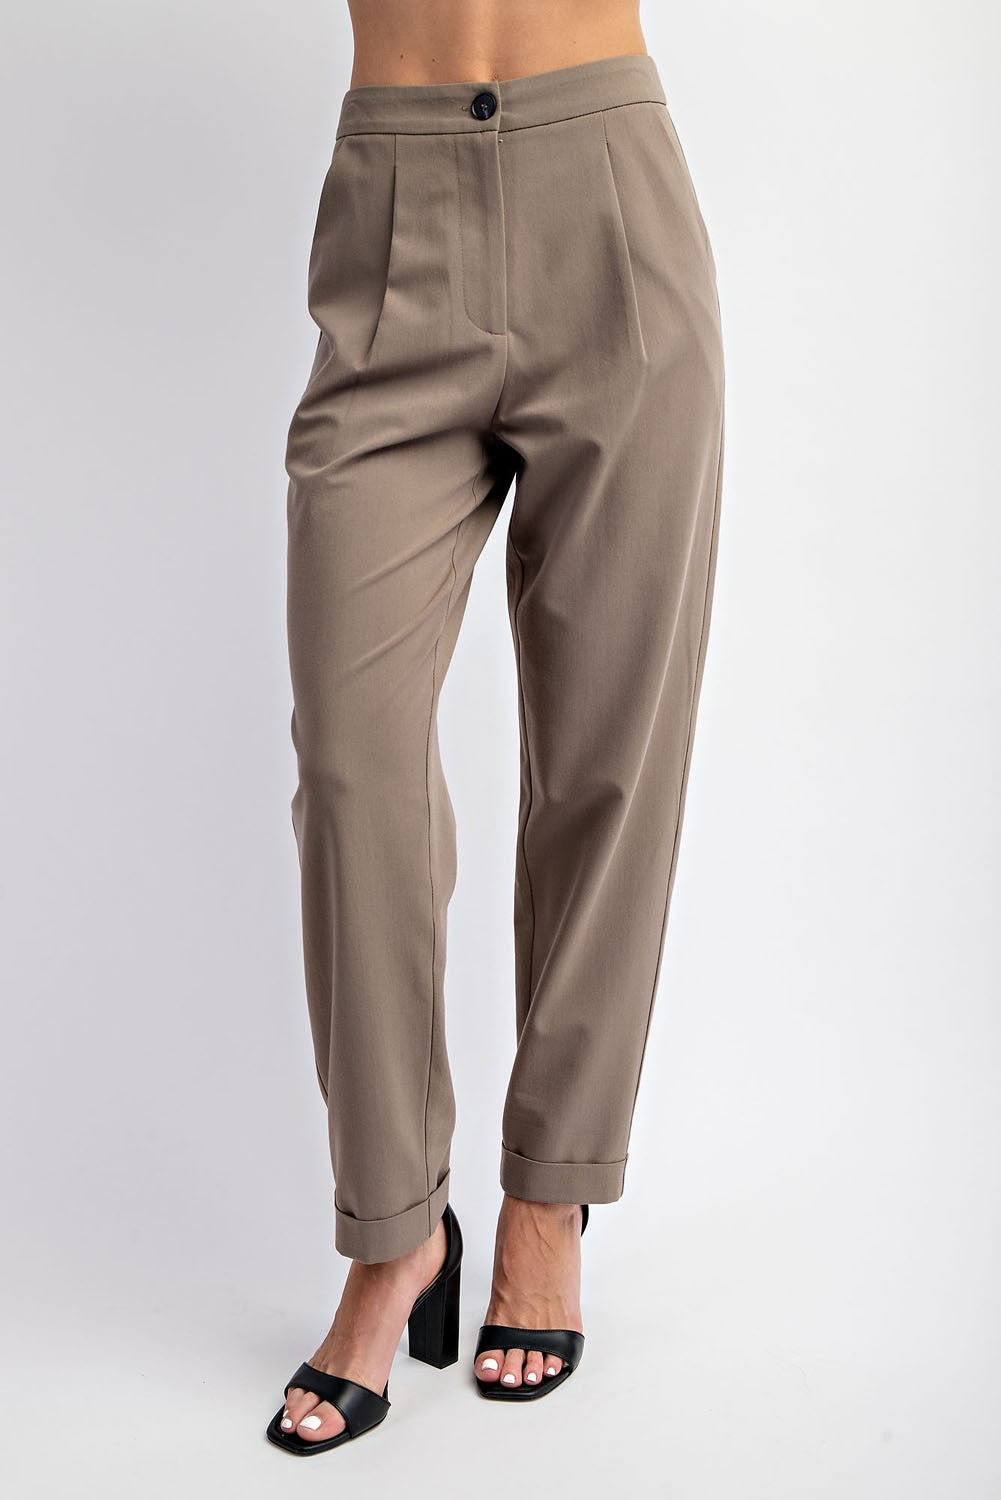 Polly Pleated Trouser- Olive